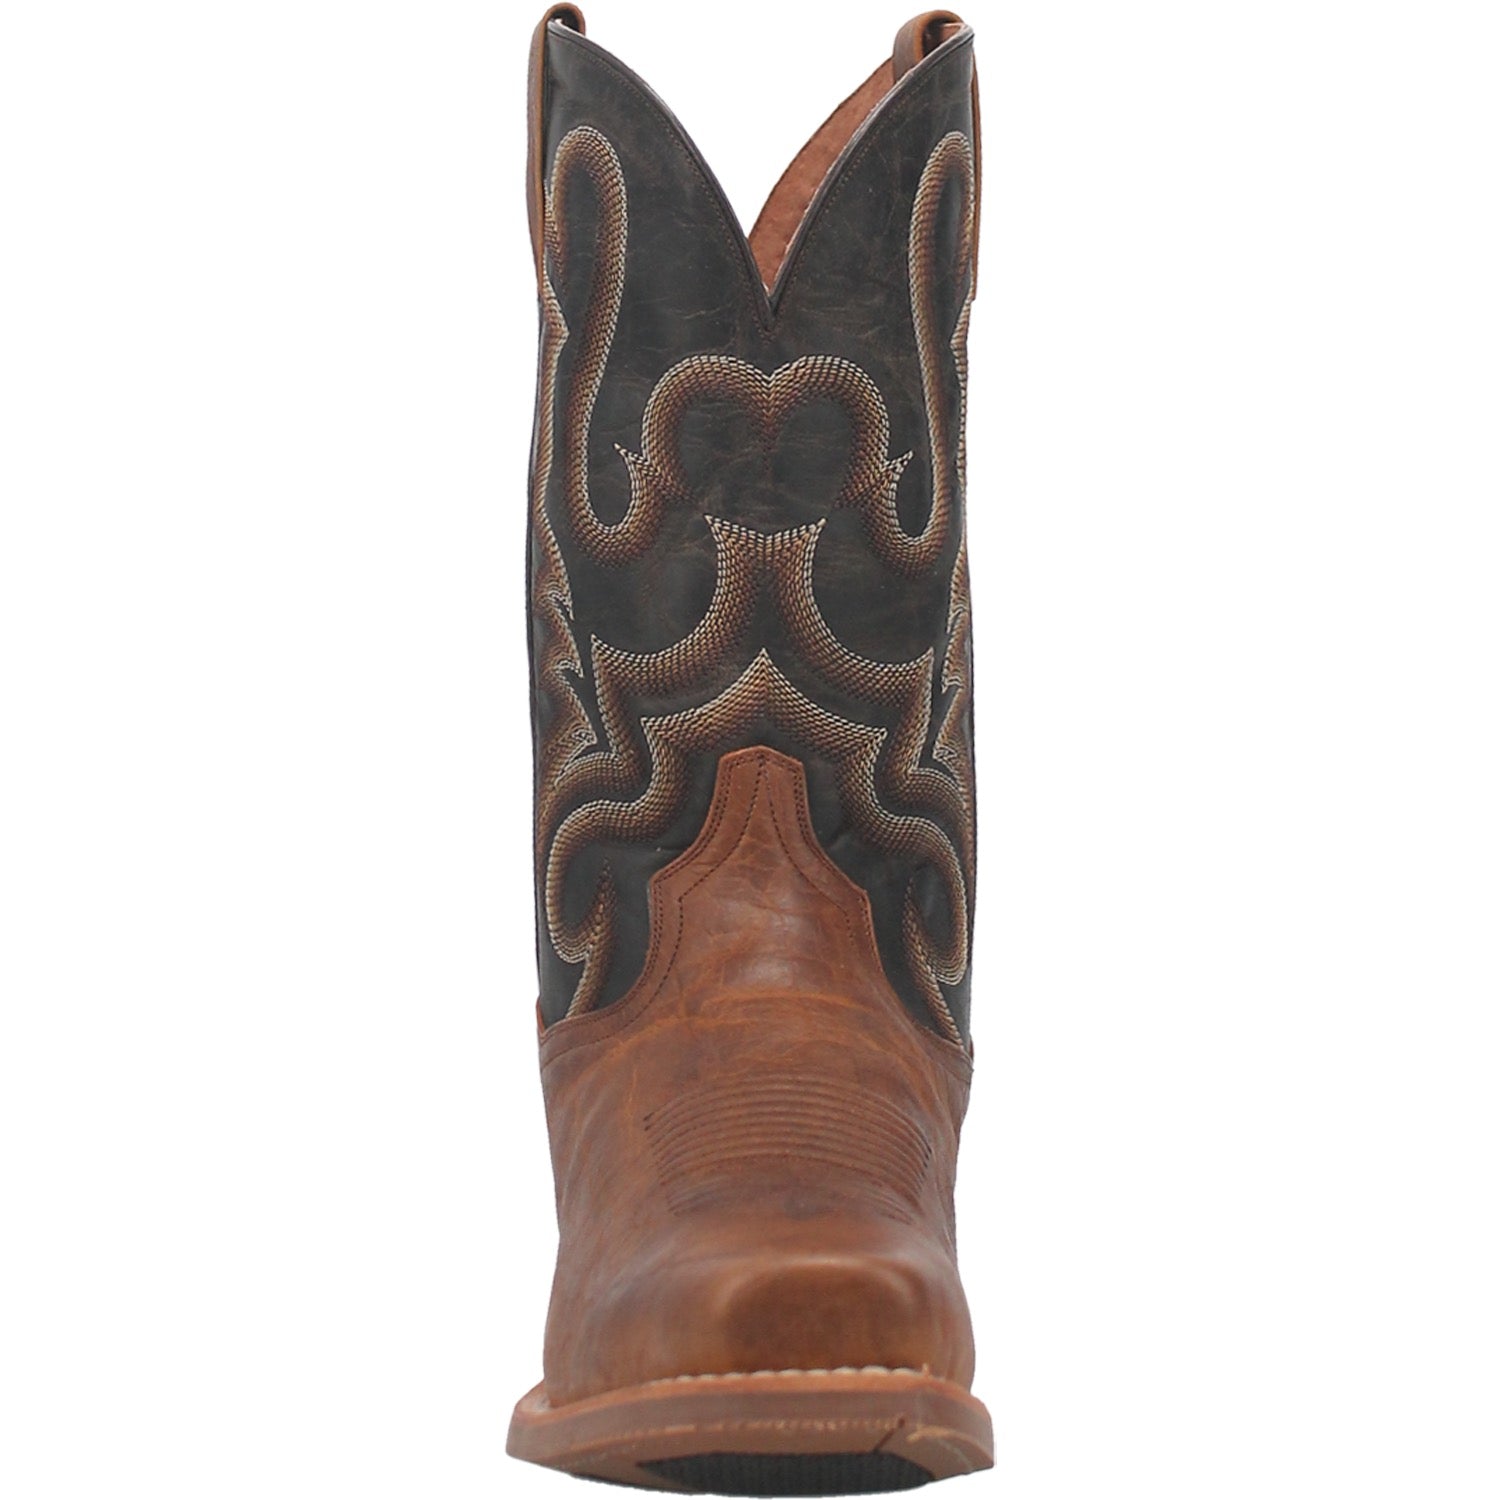 RICHLAND BISON LEATHER BOOT Image